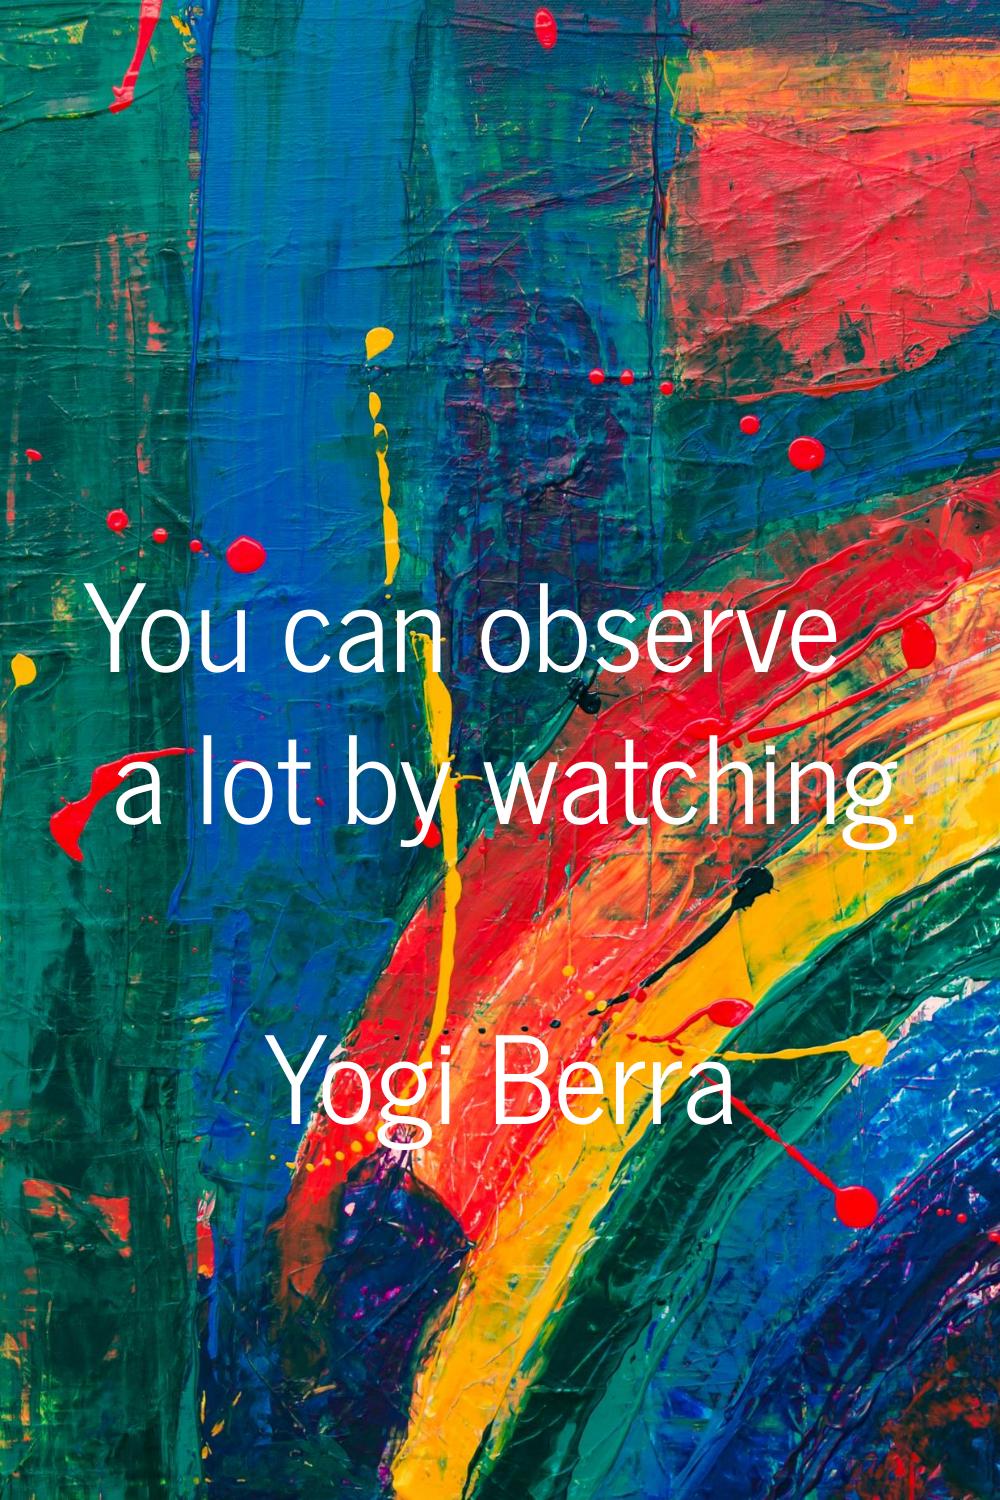 You can observe a lot by watching.